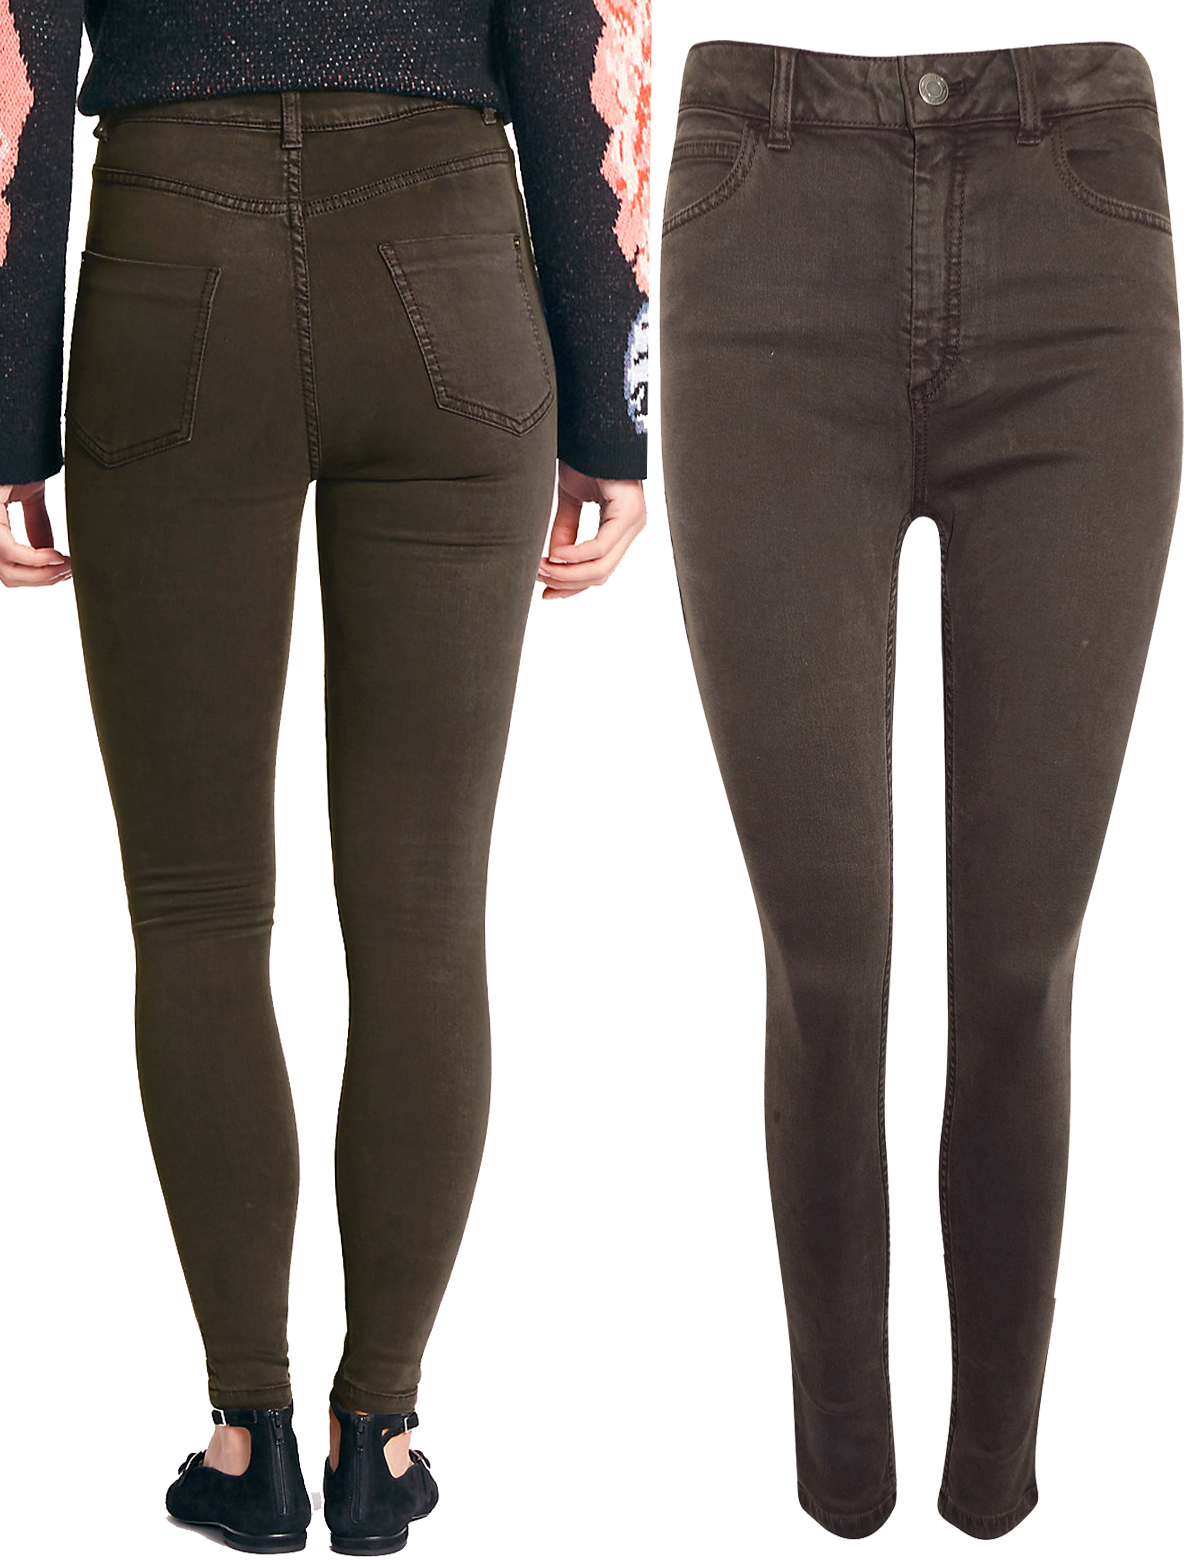 Marks and Spencer - - M&5 CHOCOLATE Mid Rise Super Skinny Jeans - Size ...